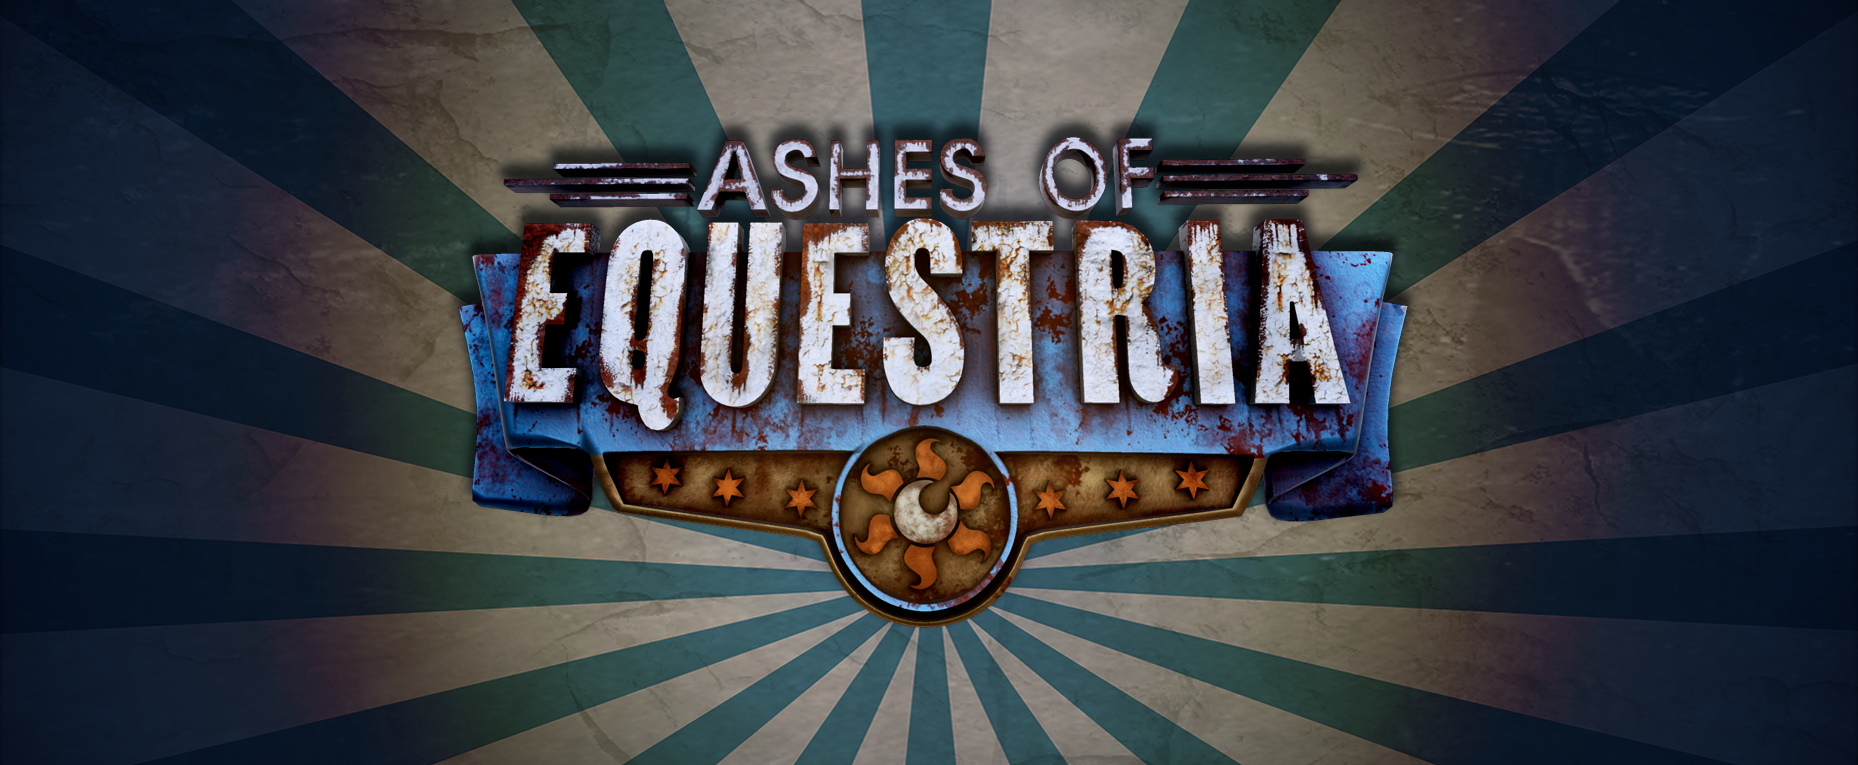 Image: Ashes of Equestria Download